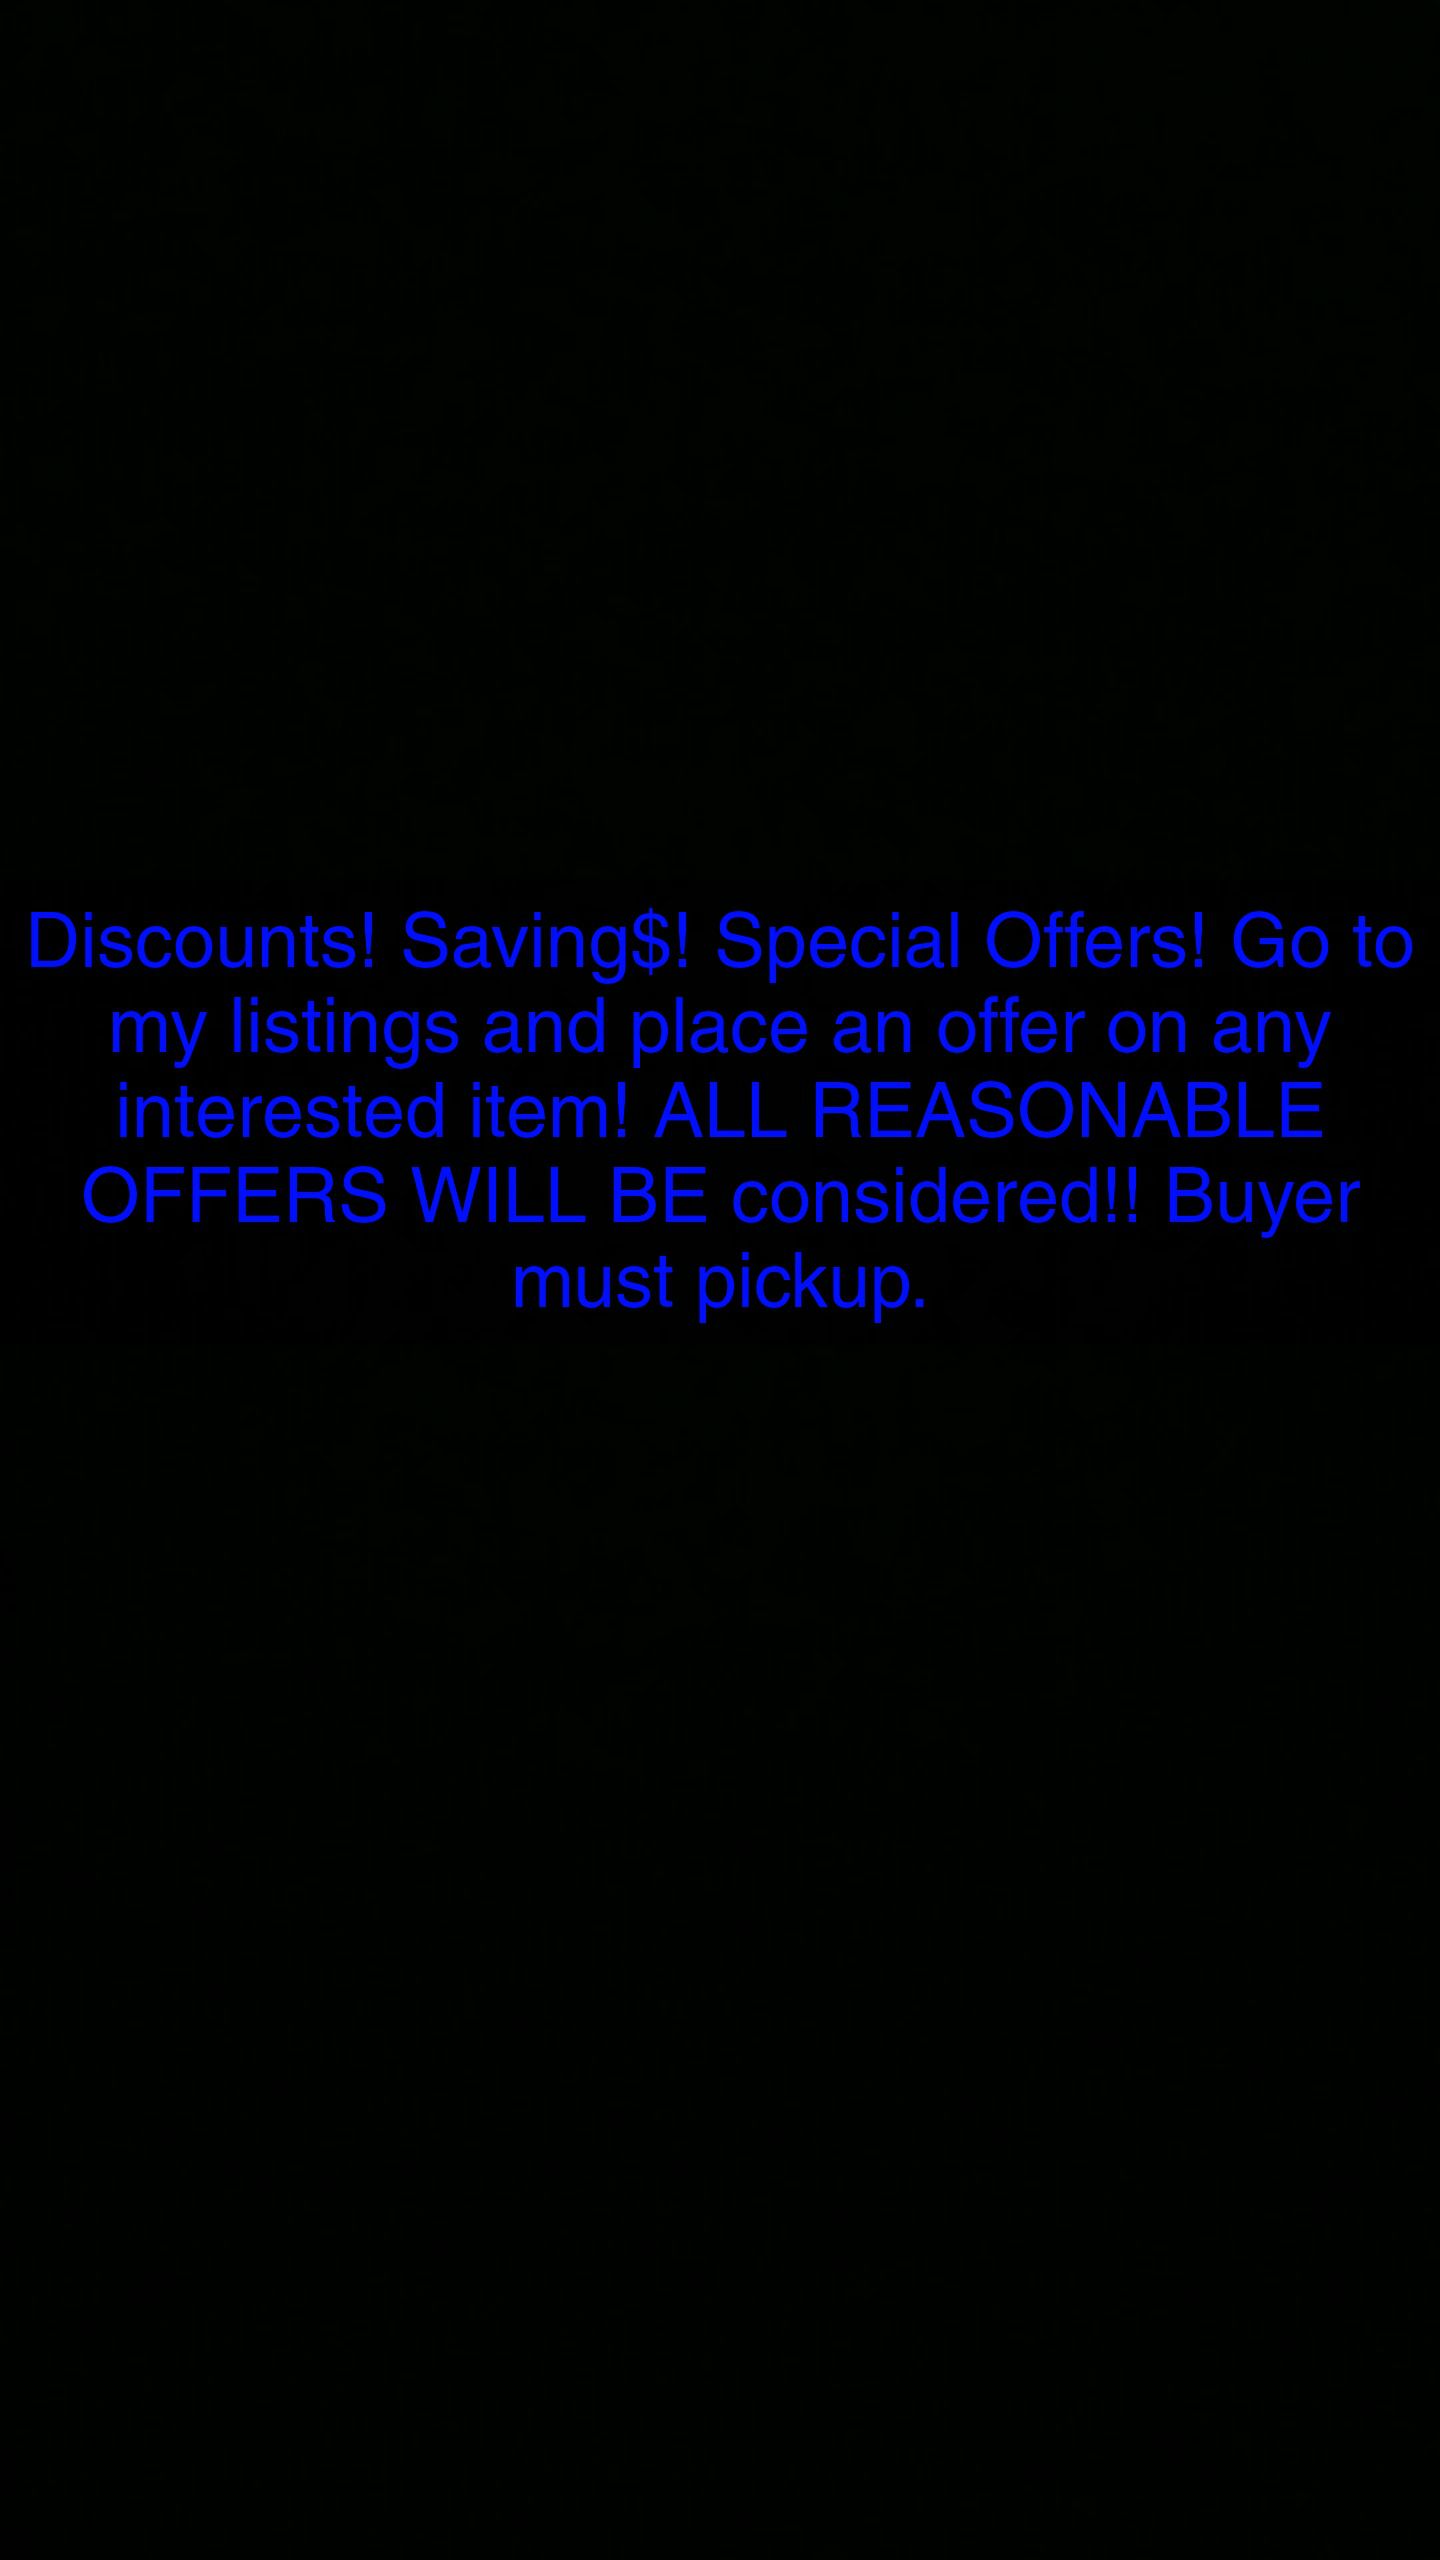 DISCOUNTS! SAVING$! SPECIAL OFFERS!